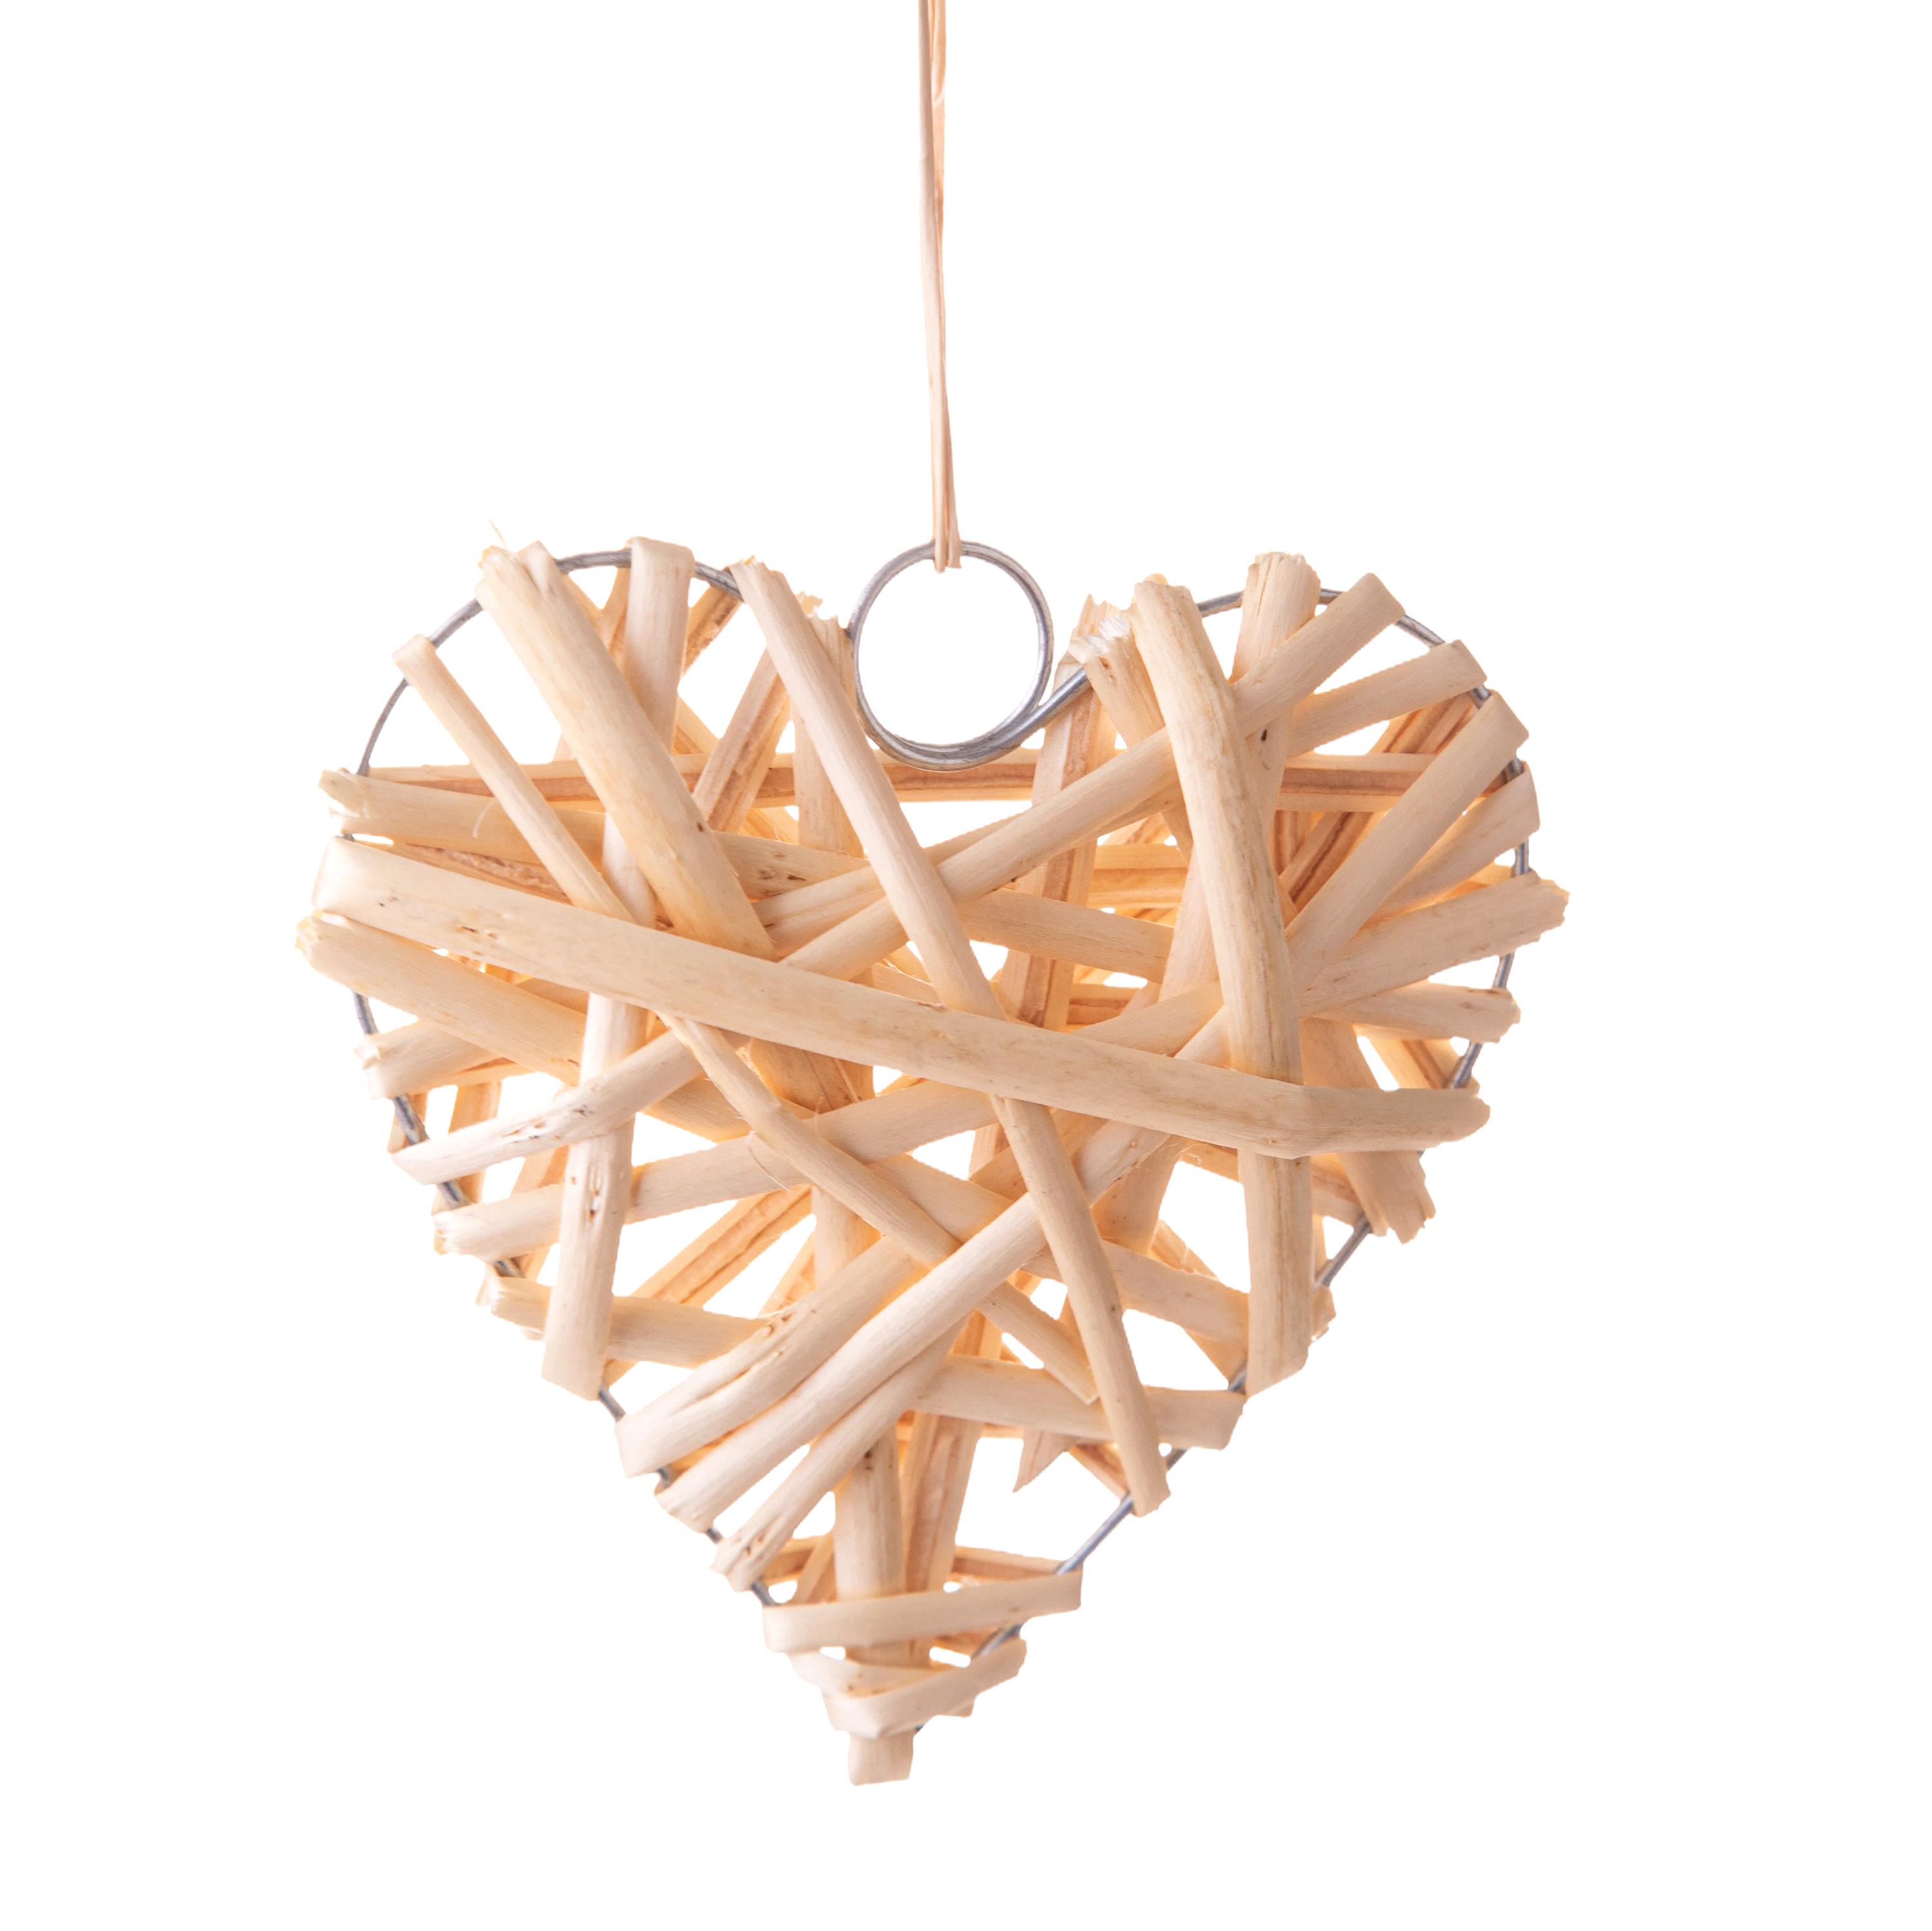 HEARTS, S.VALENTINE, MOM'S DAY, HEARTS IN RATTAN AND OTHER MATERIALS, CUORE RATTAN 10 CM NATURALE